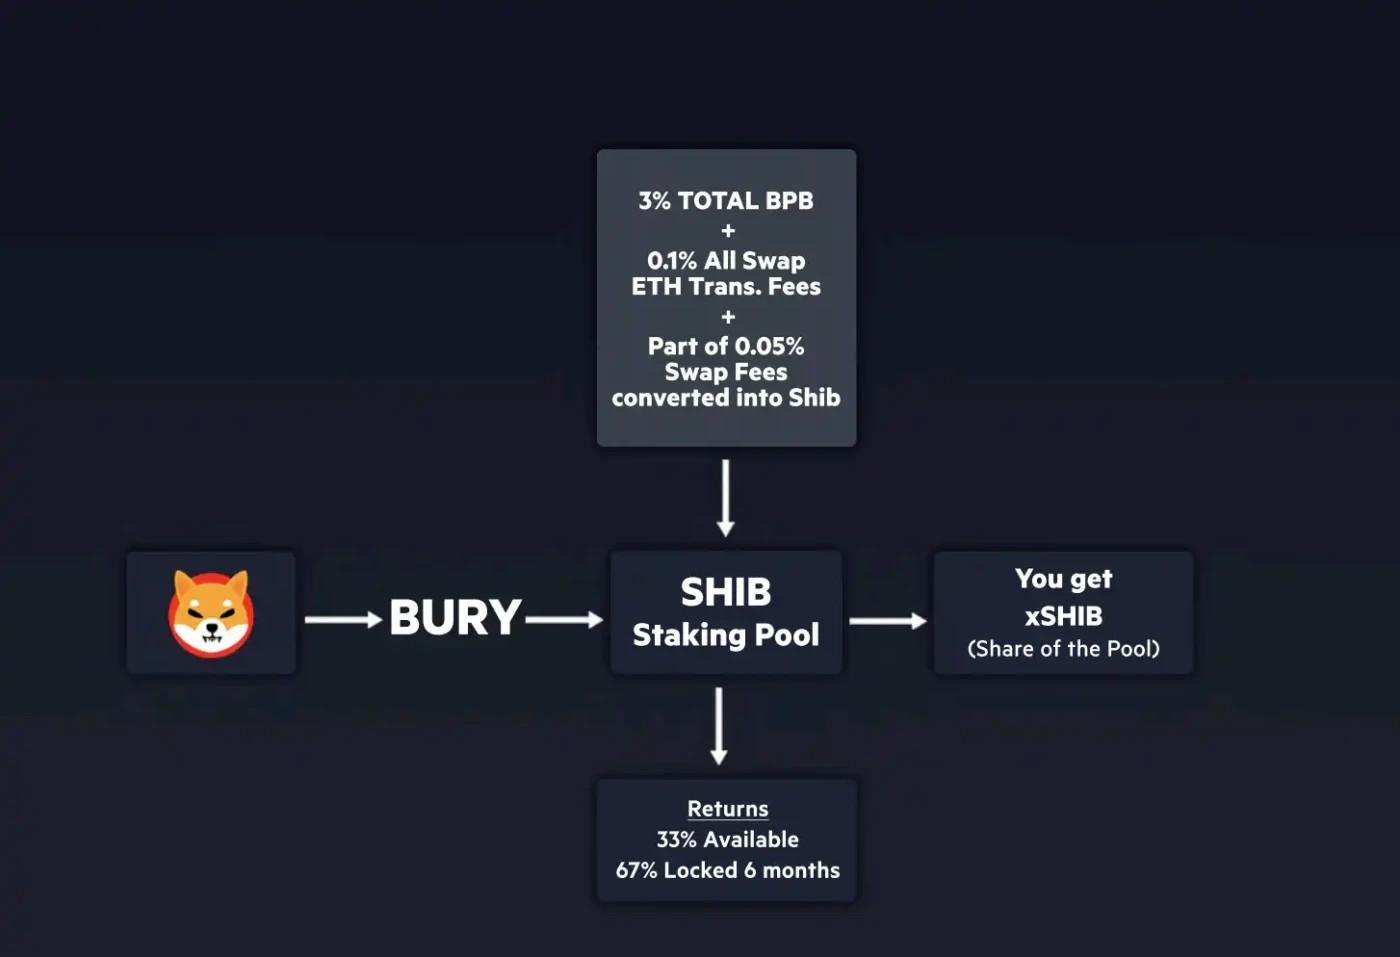 Infographic of the rewards system's function when a user buries SHIB